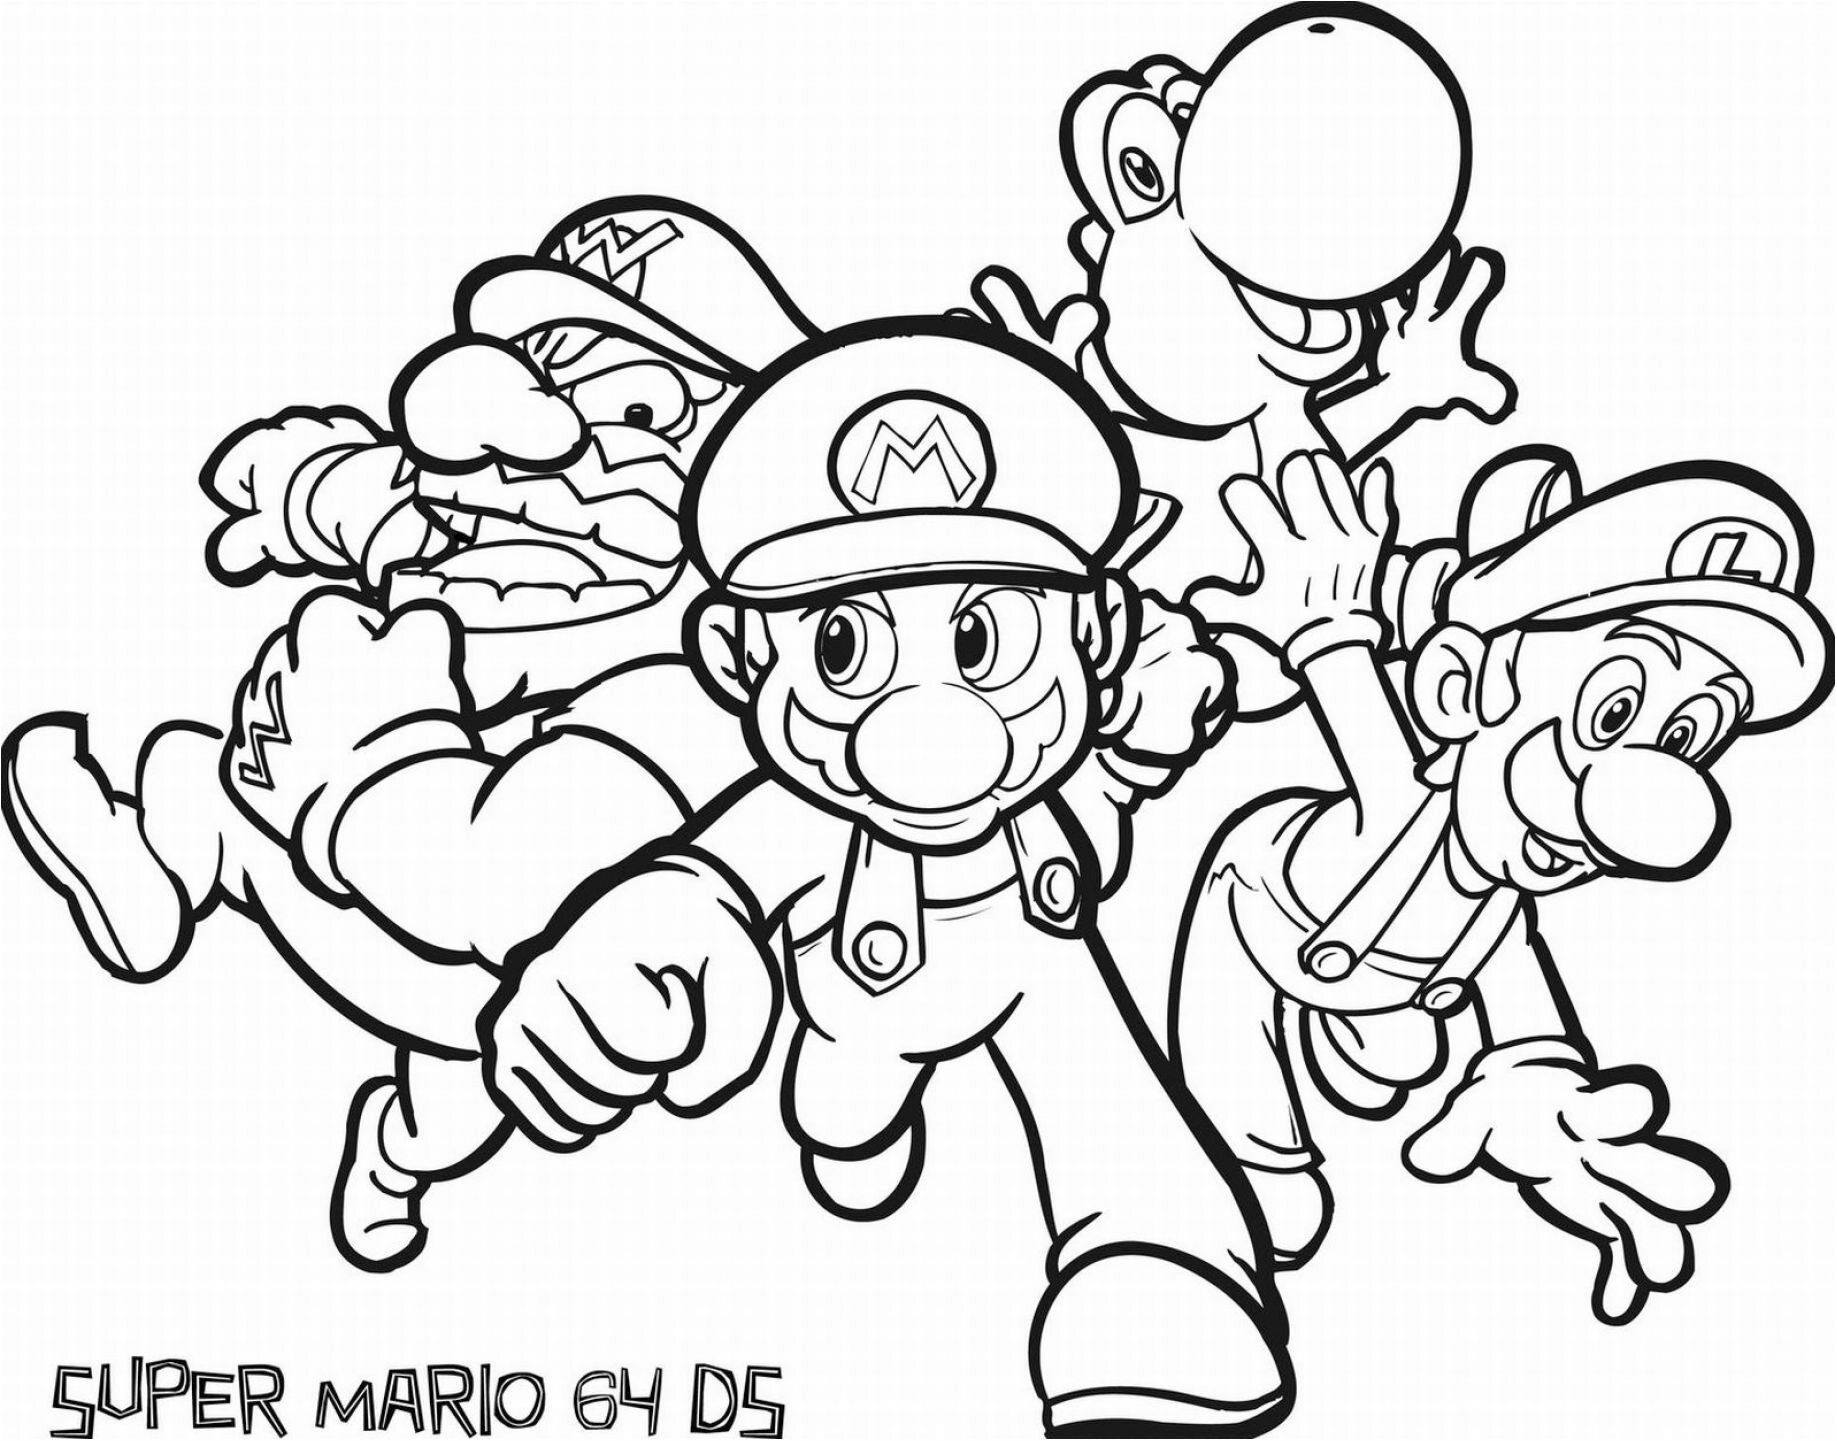 great Free Coloring Pages coloring pages – free printable coloring pages for children